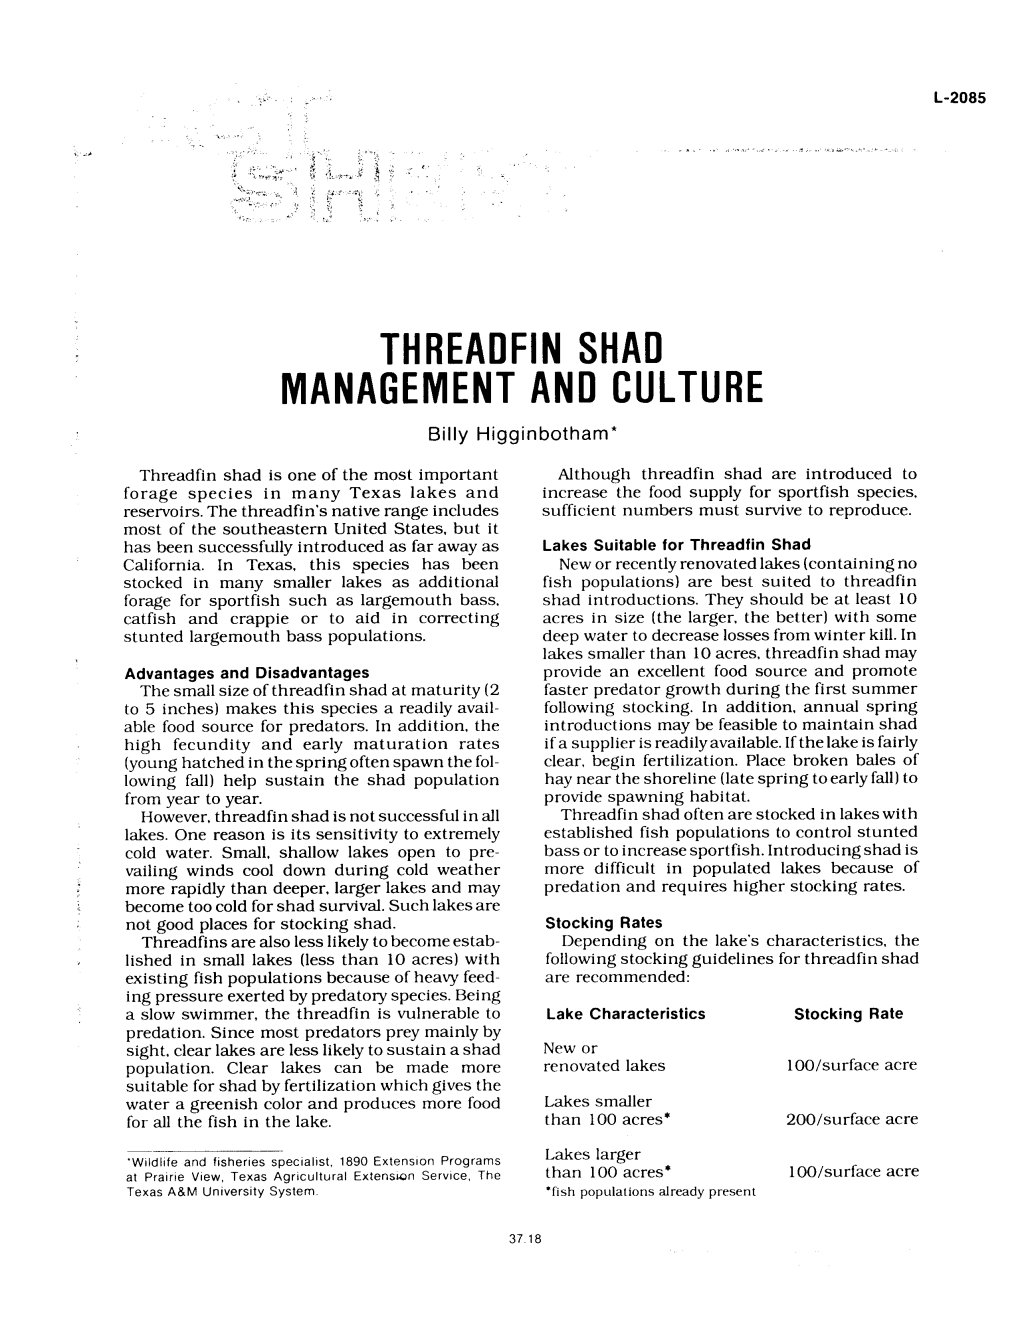 Threadfin Shad Management and Culture